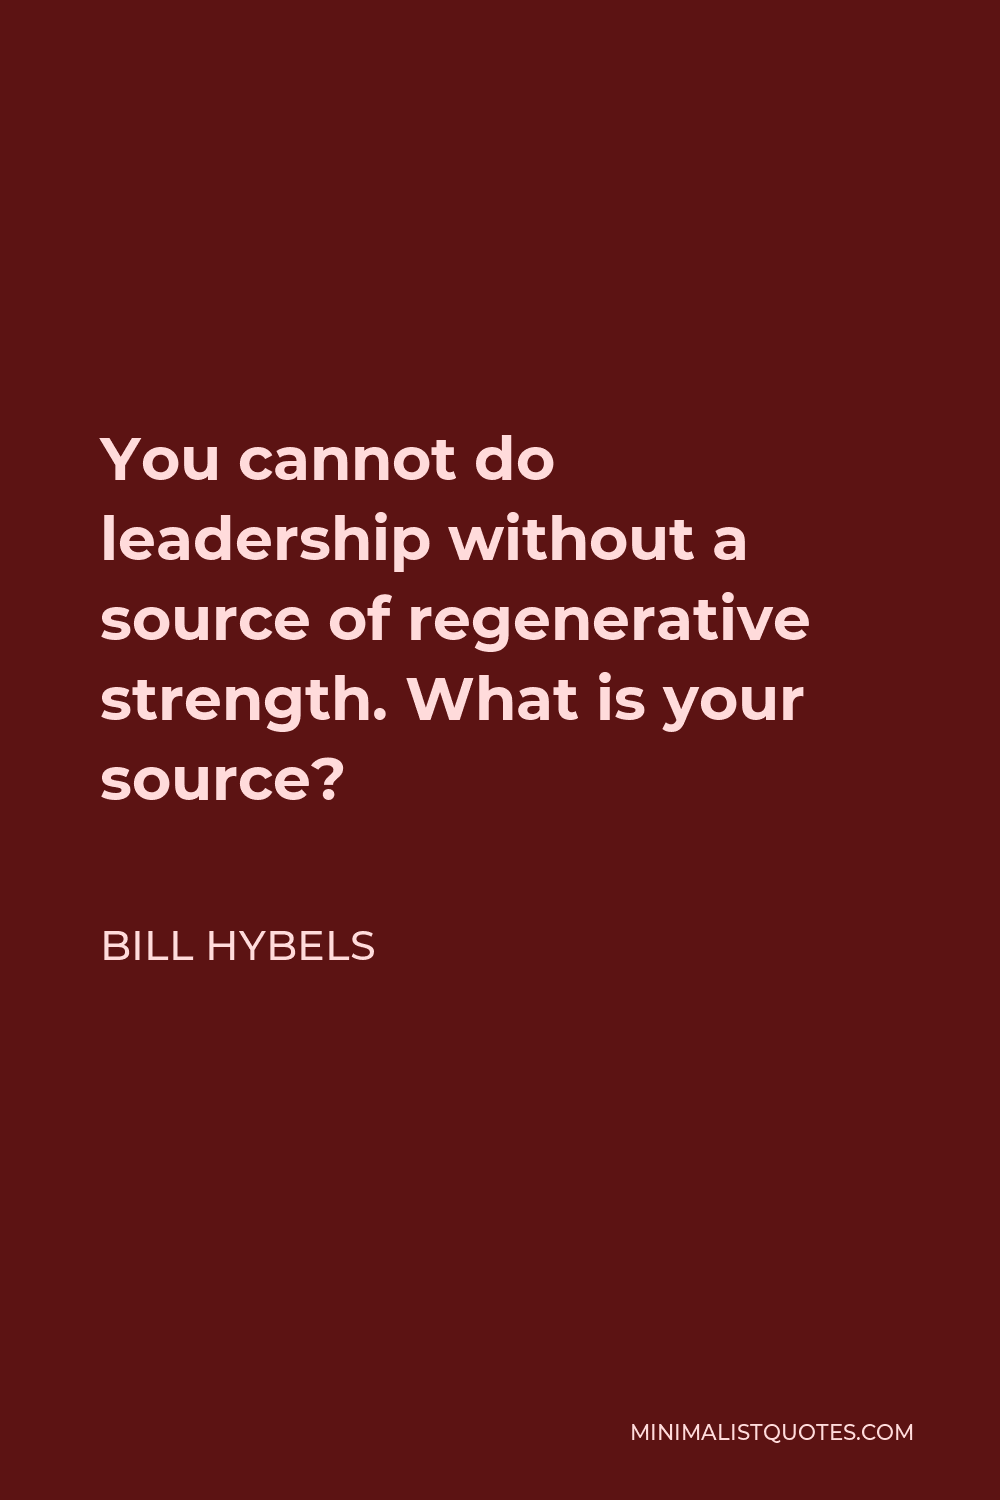 Bill Hybels Quote - You cannot do leadership without a source of regenerative strength. What is your source?